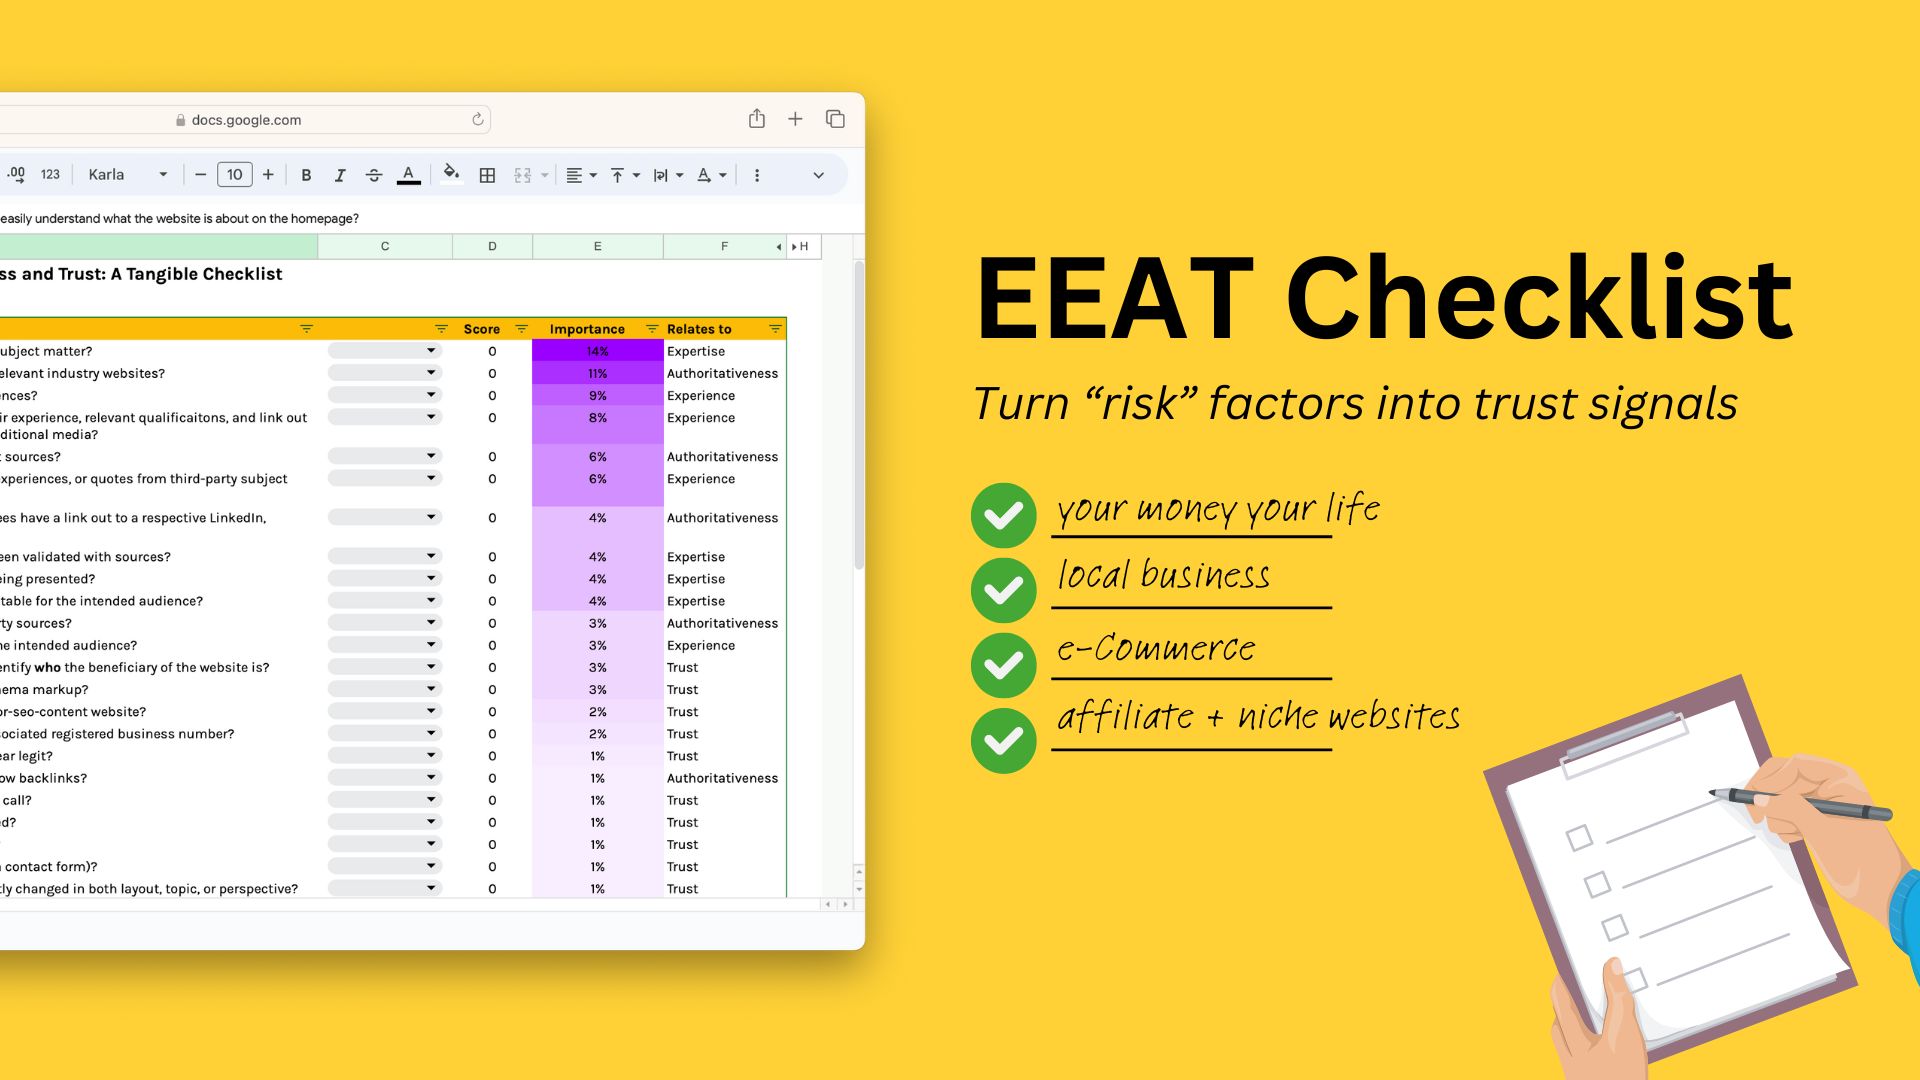 Use this actionable EEAT checklist to improve your trust and conversions